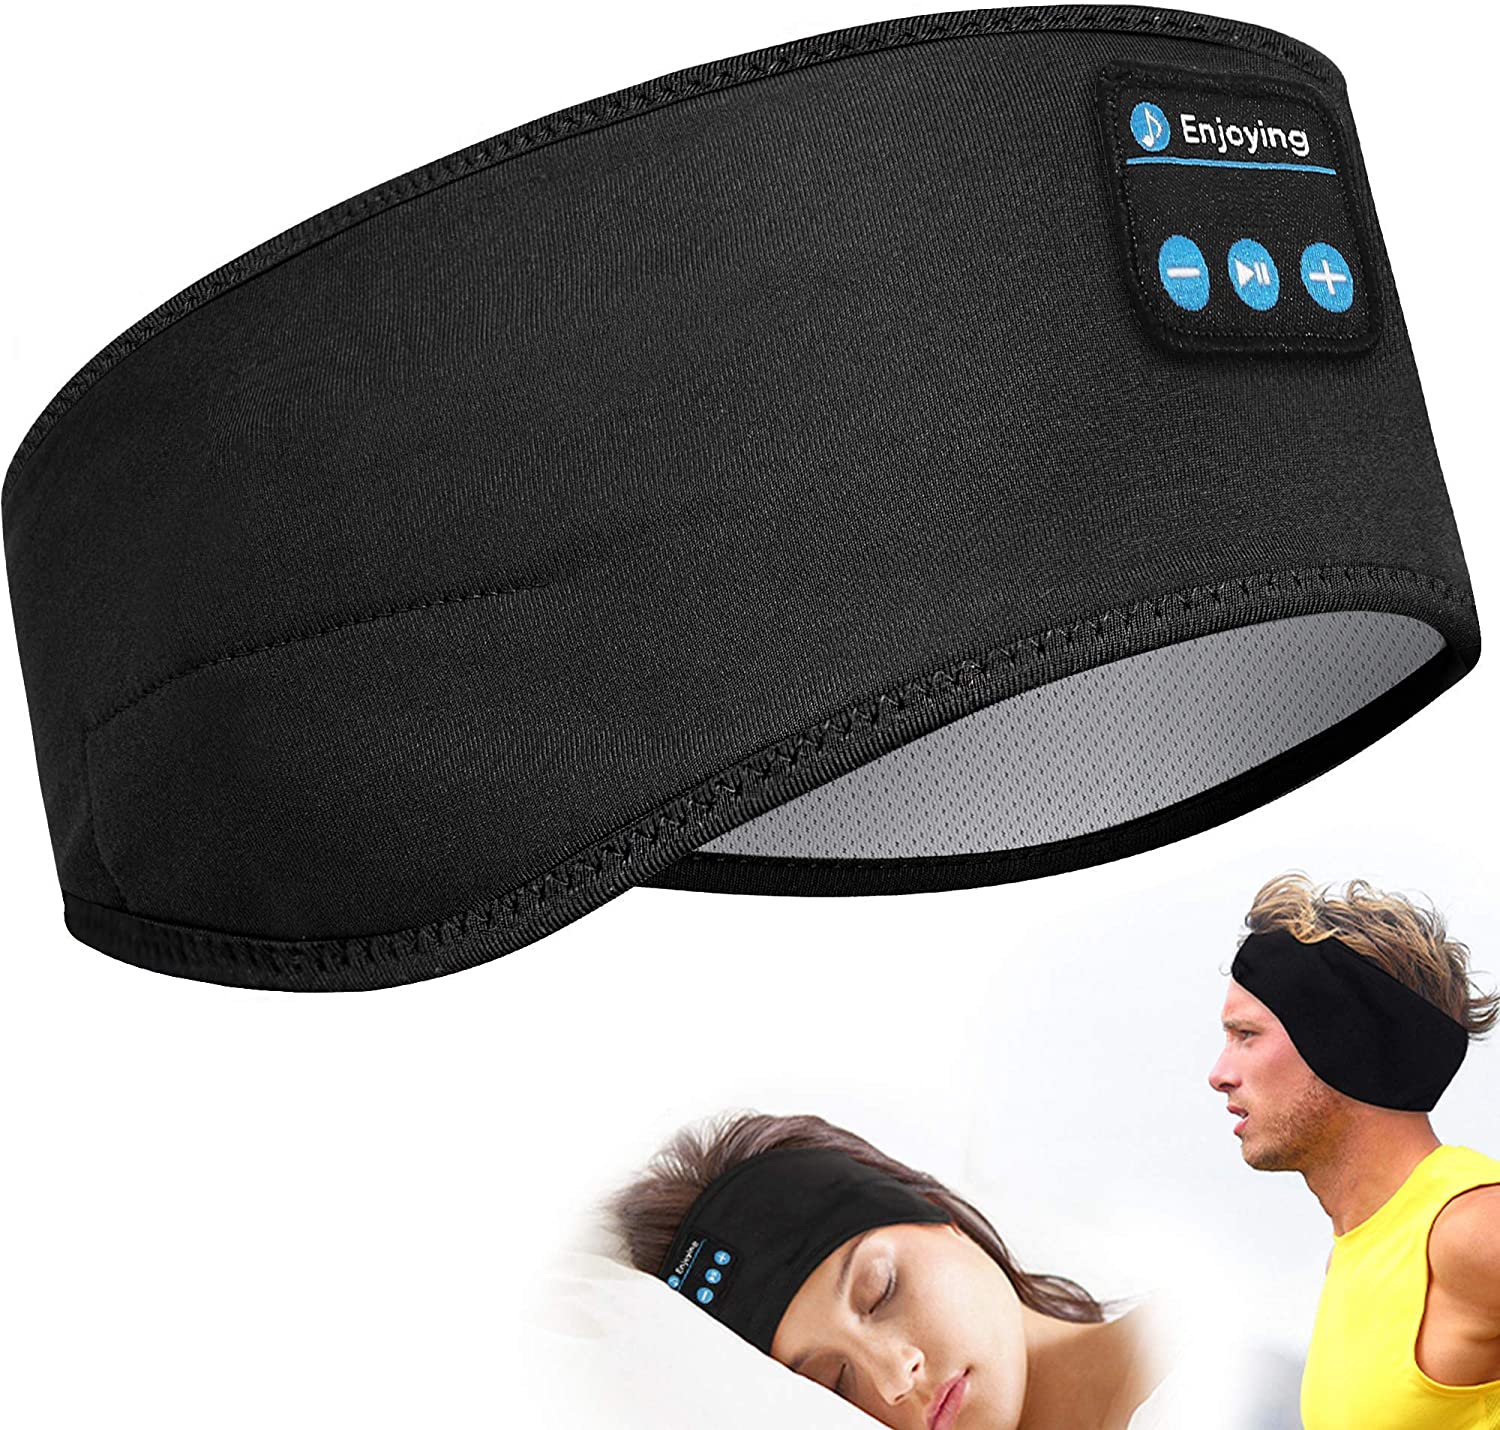 Lavince, Lavince Sleep Headphones Bluetooth Sports Headband, Wireless Sports Headband Headphones with Ultra-Thin HD Stereo Speakers Perfect for Workout,Jogging,Yoga,Insomnia,Side Sleepers,Air Travel,Meditation